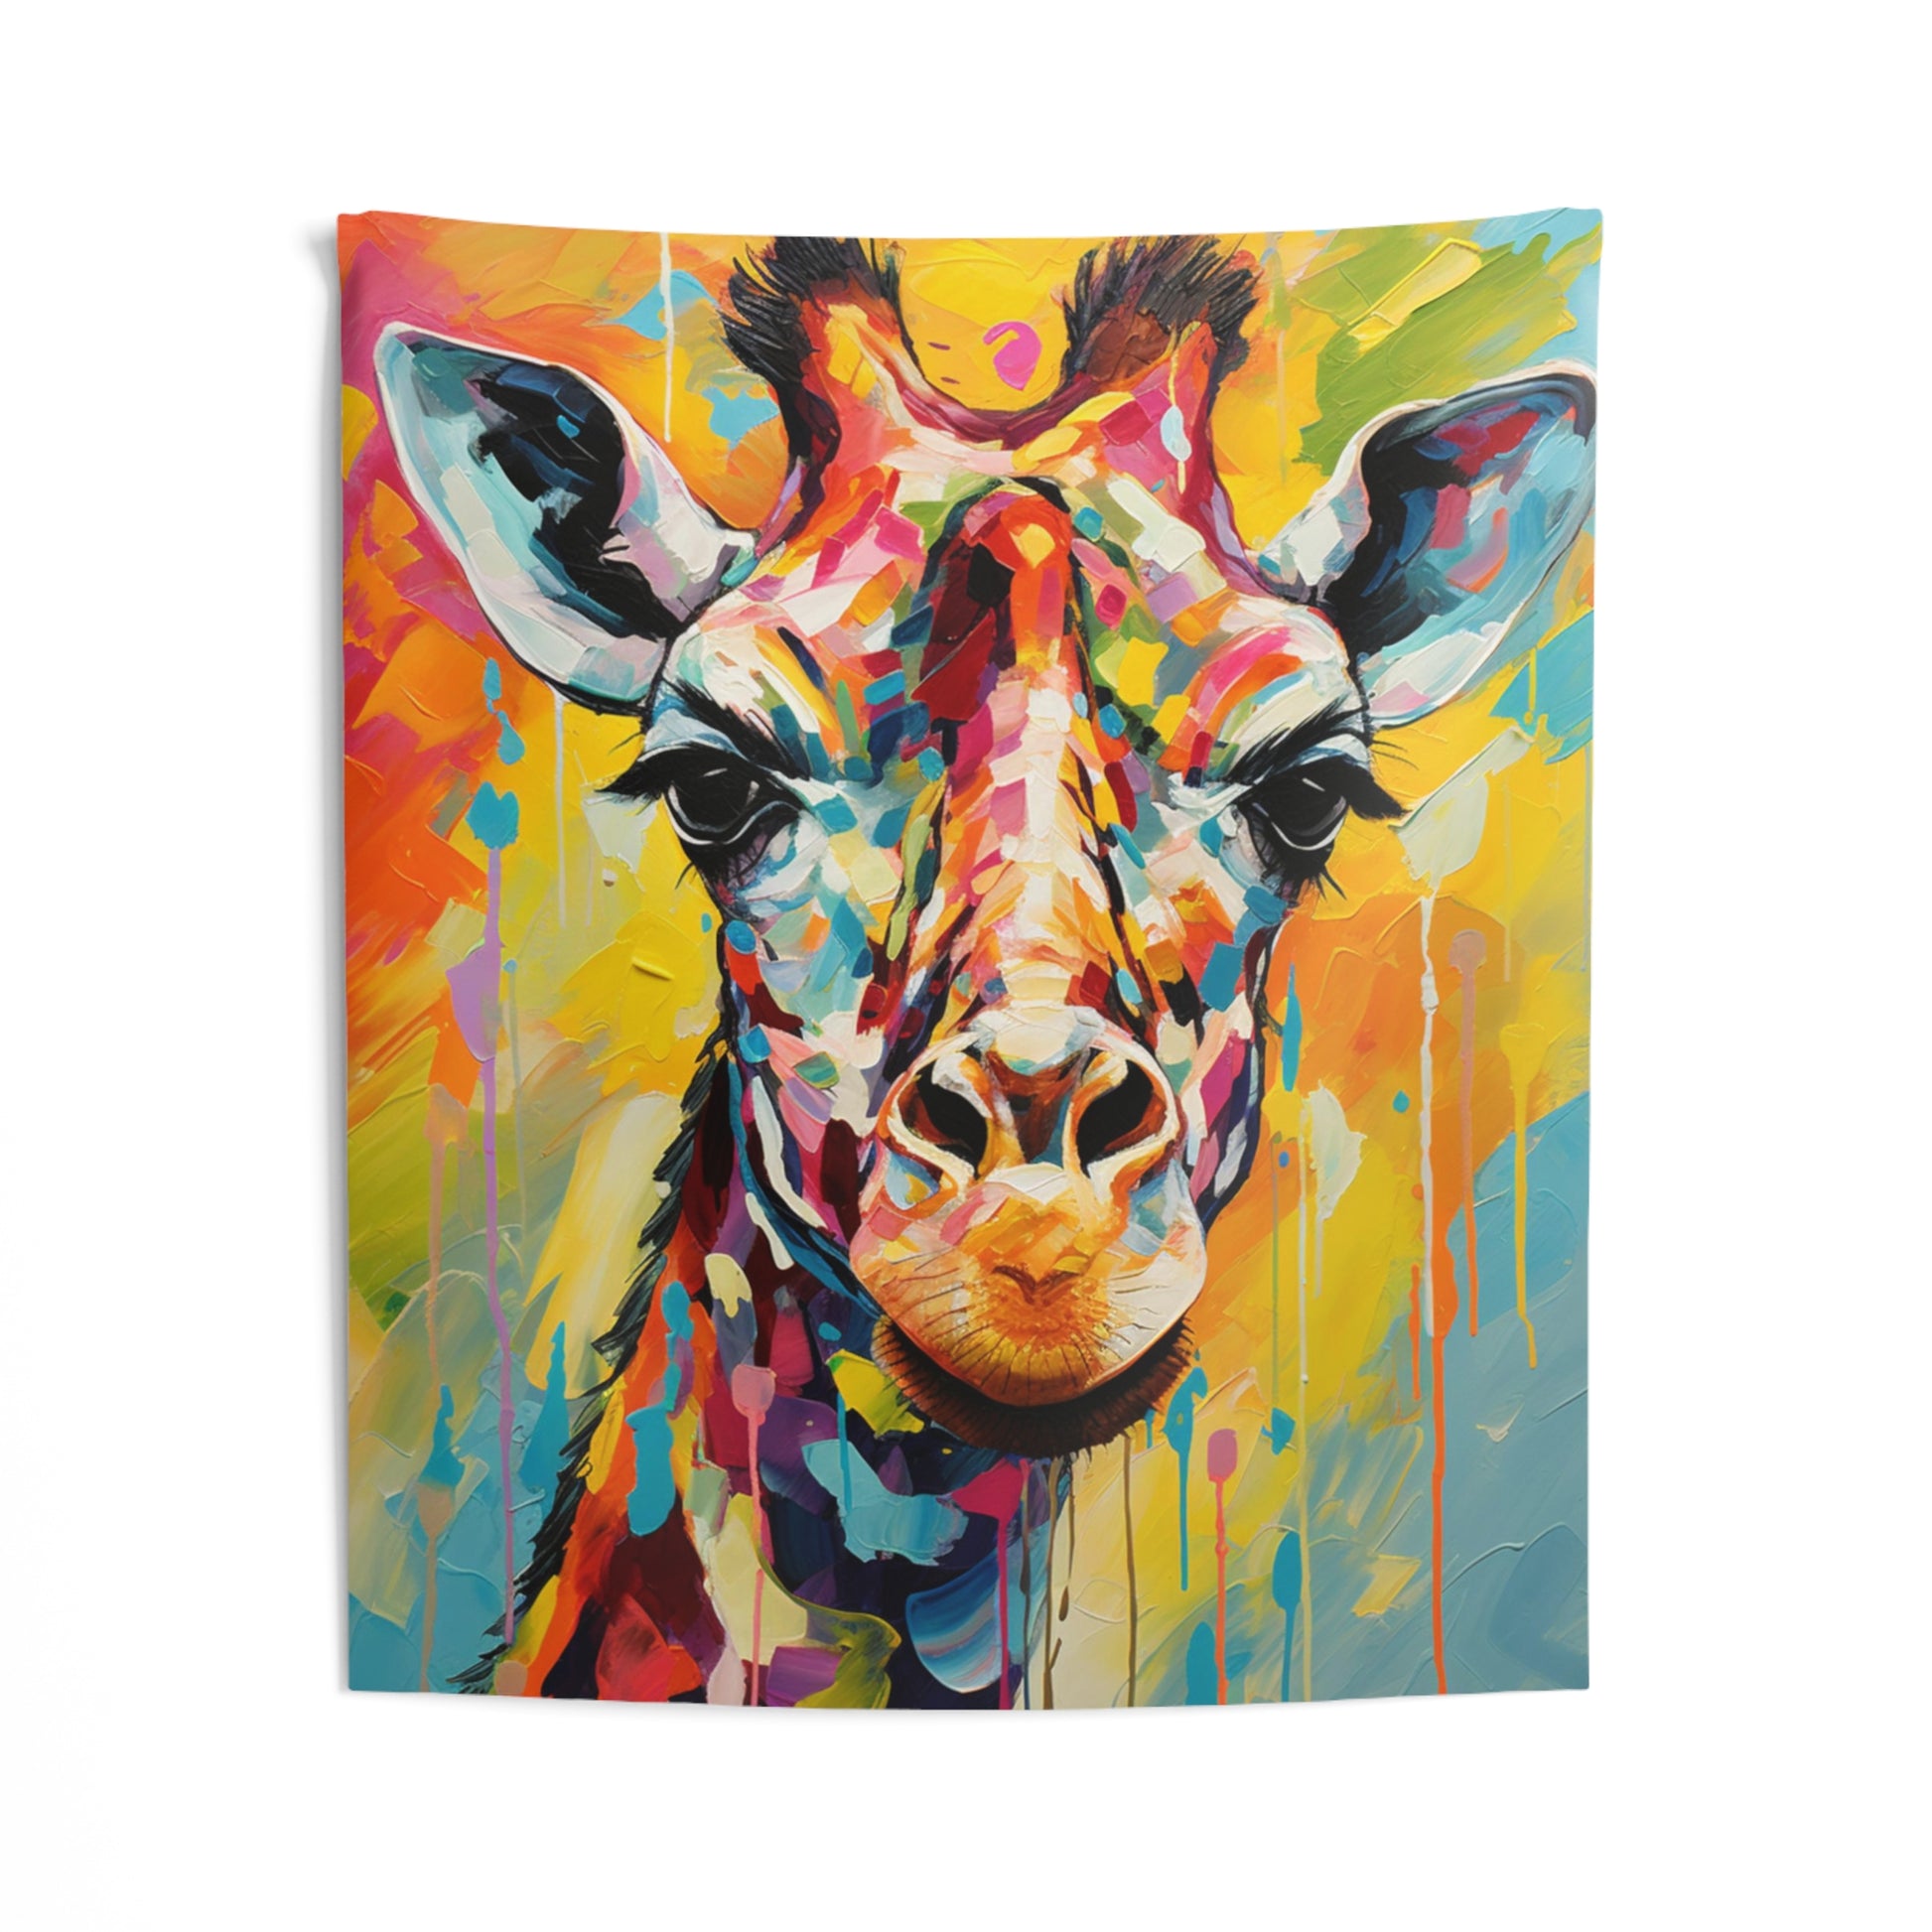 Giraffe Tapestry, Painting Animal Wall Art Hanging Cool Unique Vertical Aesthetic Large Small Decor Bedroom College Dorm Room Starcove Fashion